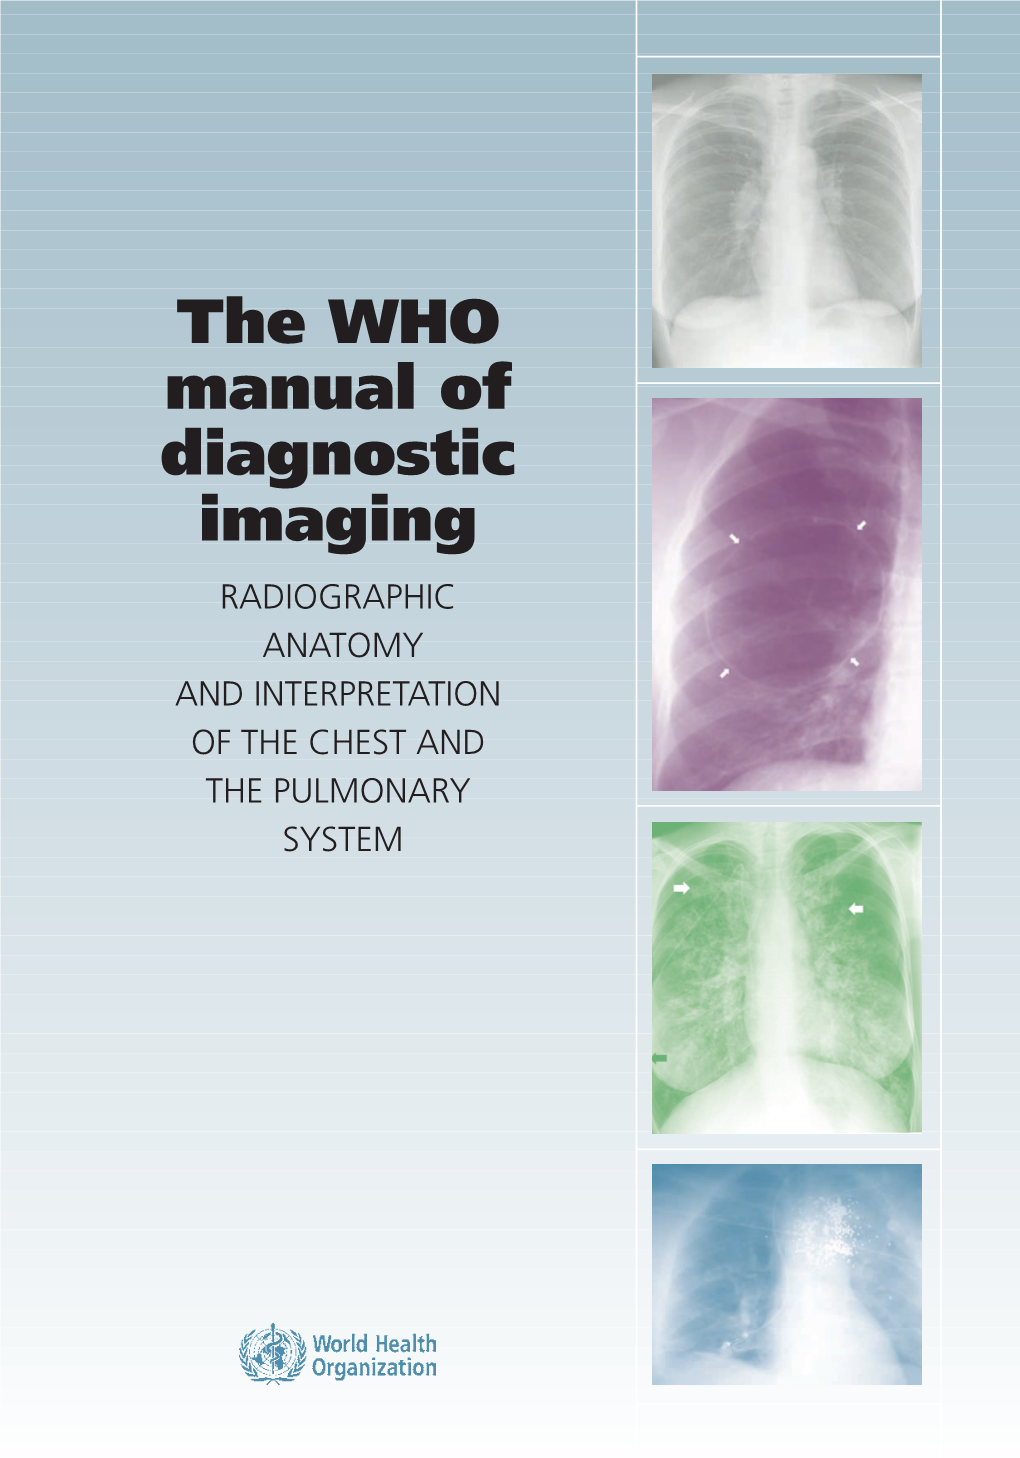 WHO Manual of Diagnostic Imaging: Radiographic Anatomy and Interpretation of the Chest